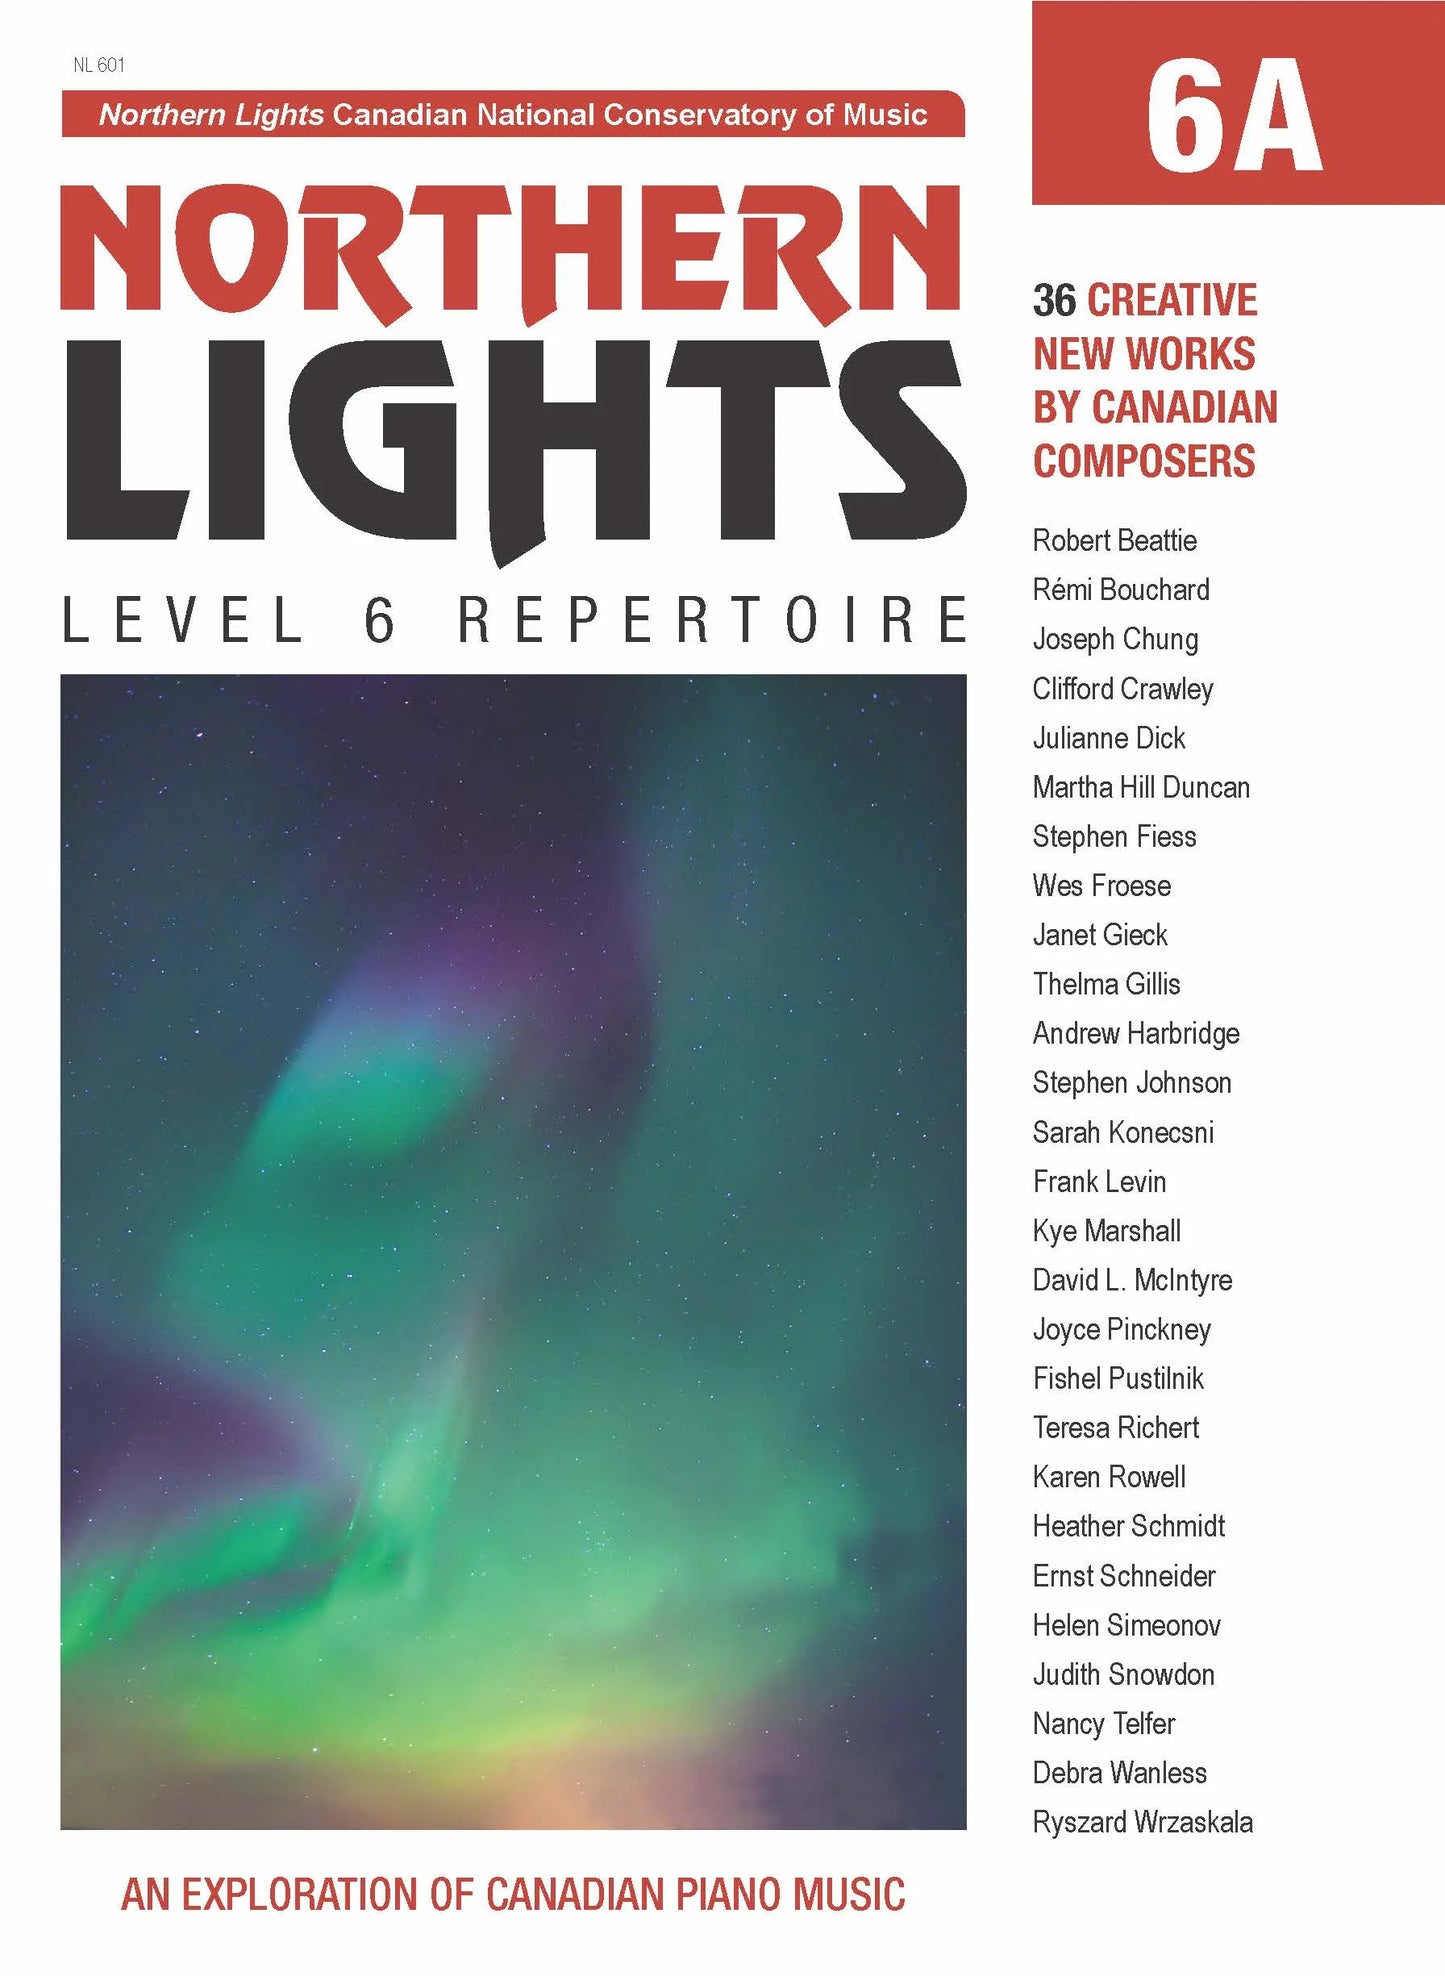 Northern Lights 6A – Repertoire